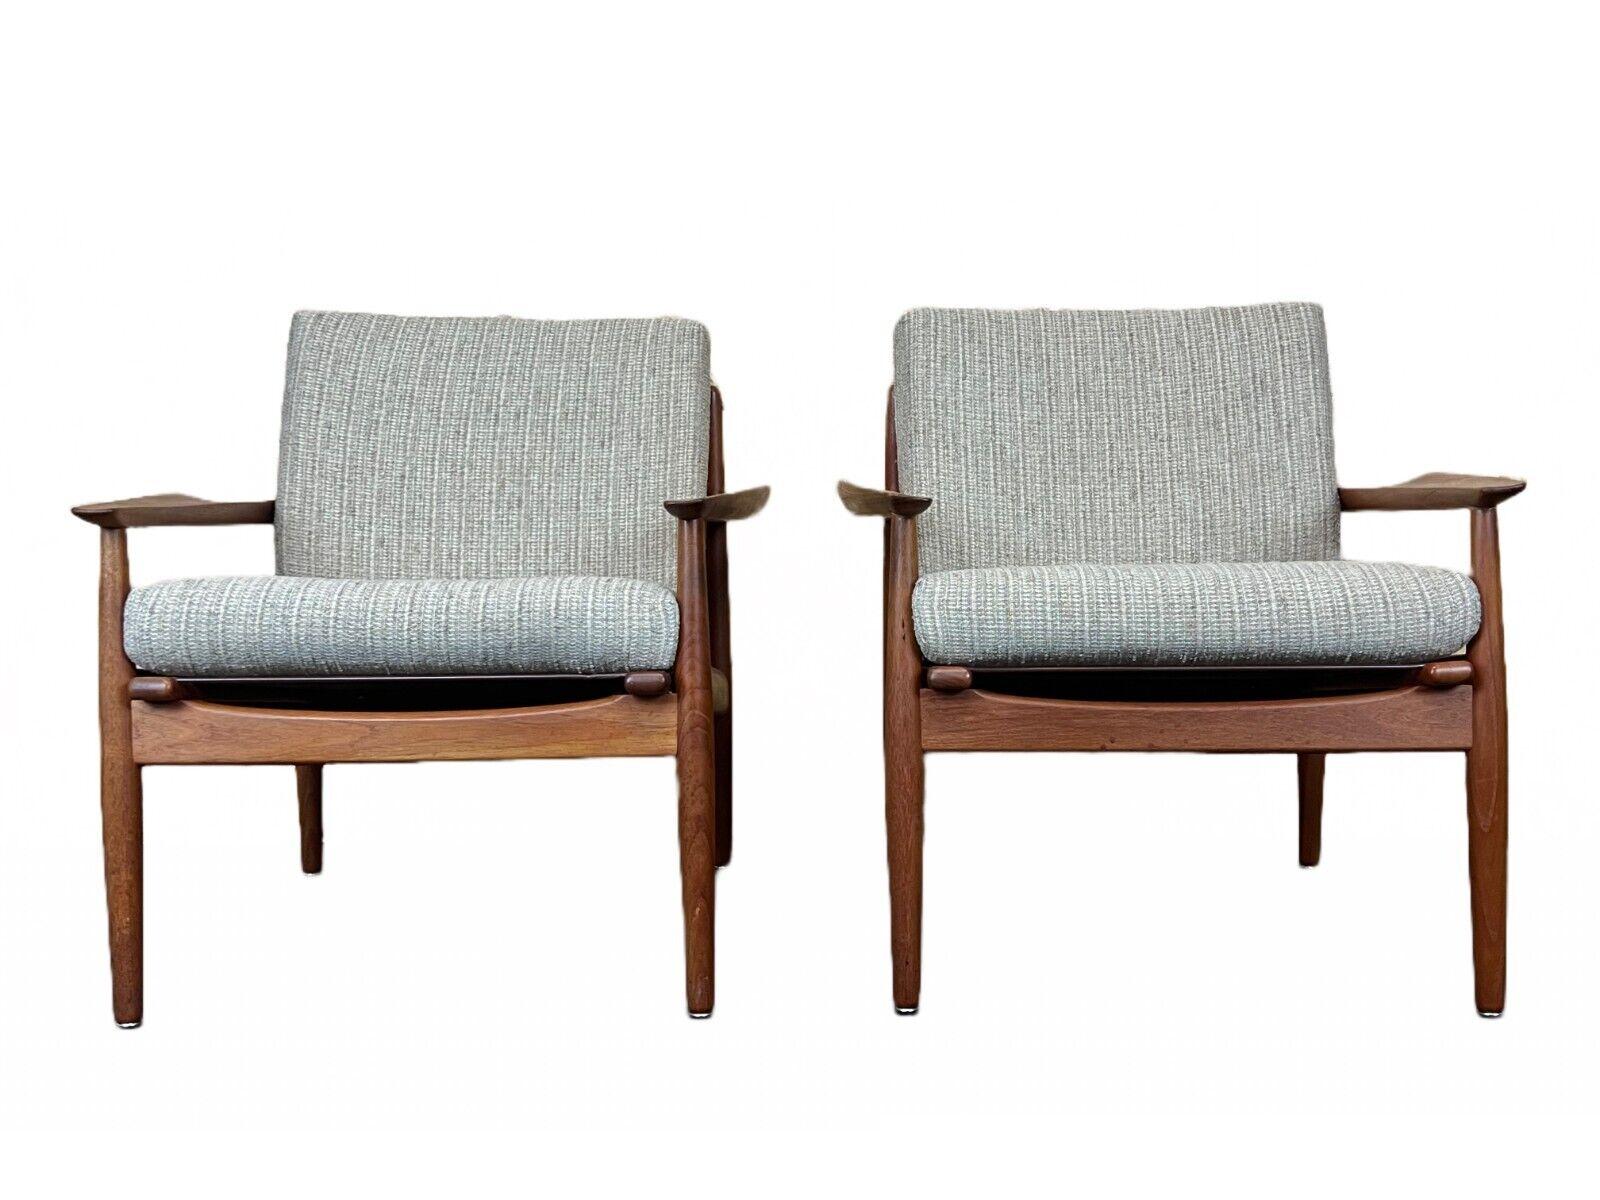 2x 60s 70s Teak Easy Chair Svend Aage Eriksen for Glostrup Design

Object: armchair

Manufacturer: Glostrup

Condition: good

Age: around 1960-1970

Dimensions:

Width = 72.5cm
Depth = 76cm
Height = 77cm
Seat height = 43cm

Other